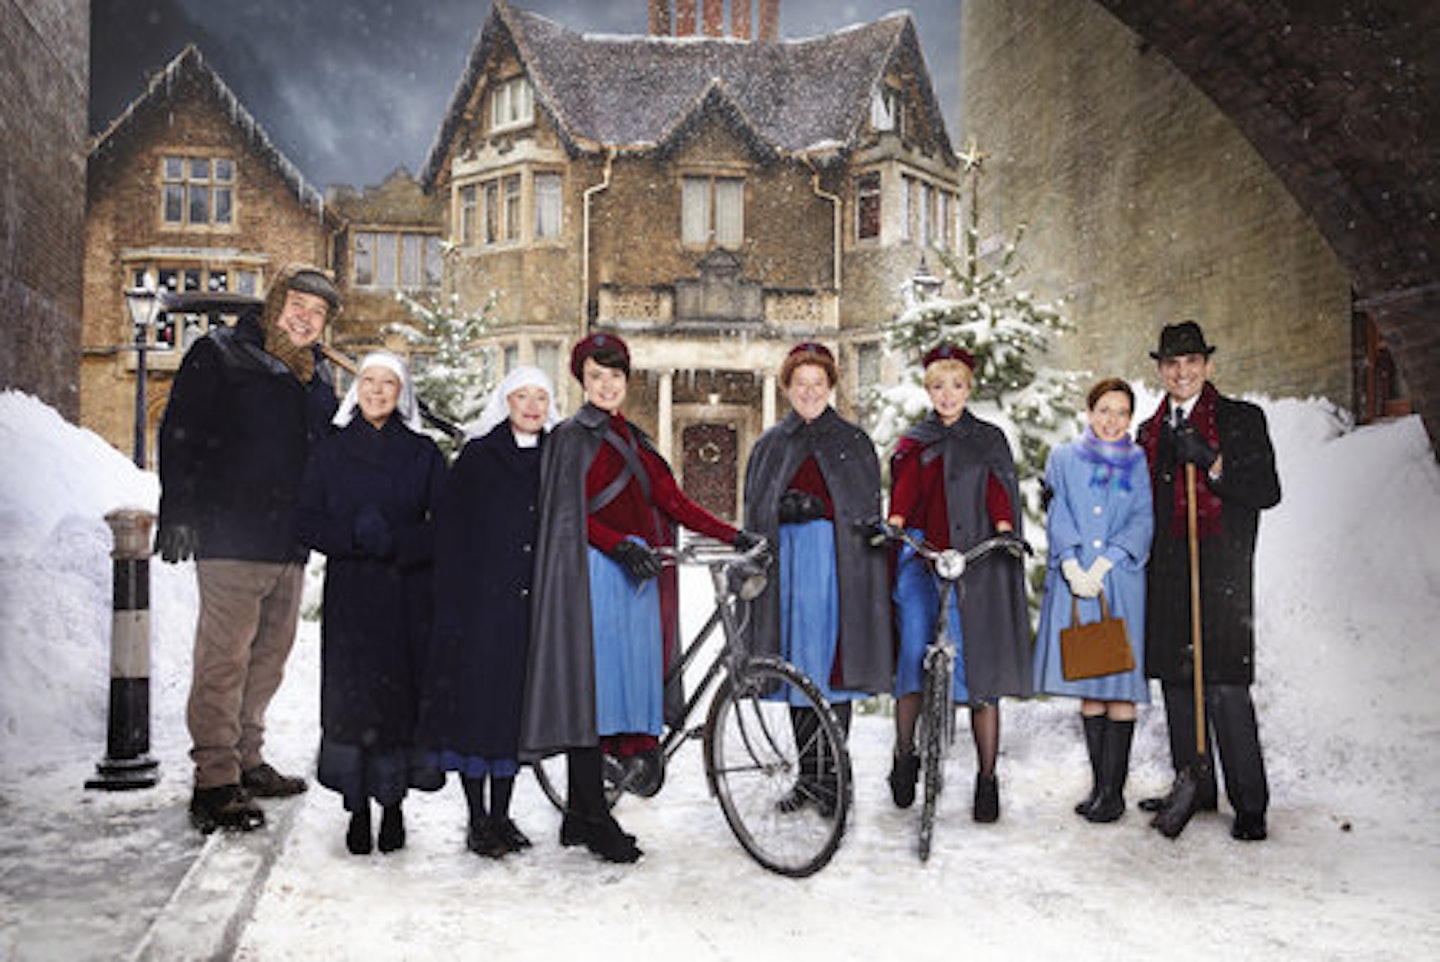 Call the Midwife Christmas special